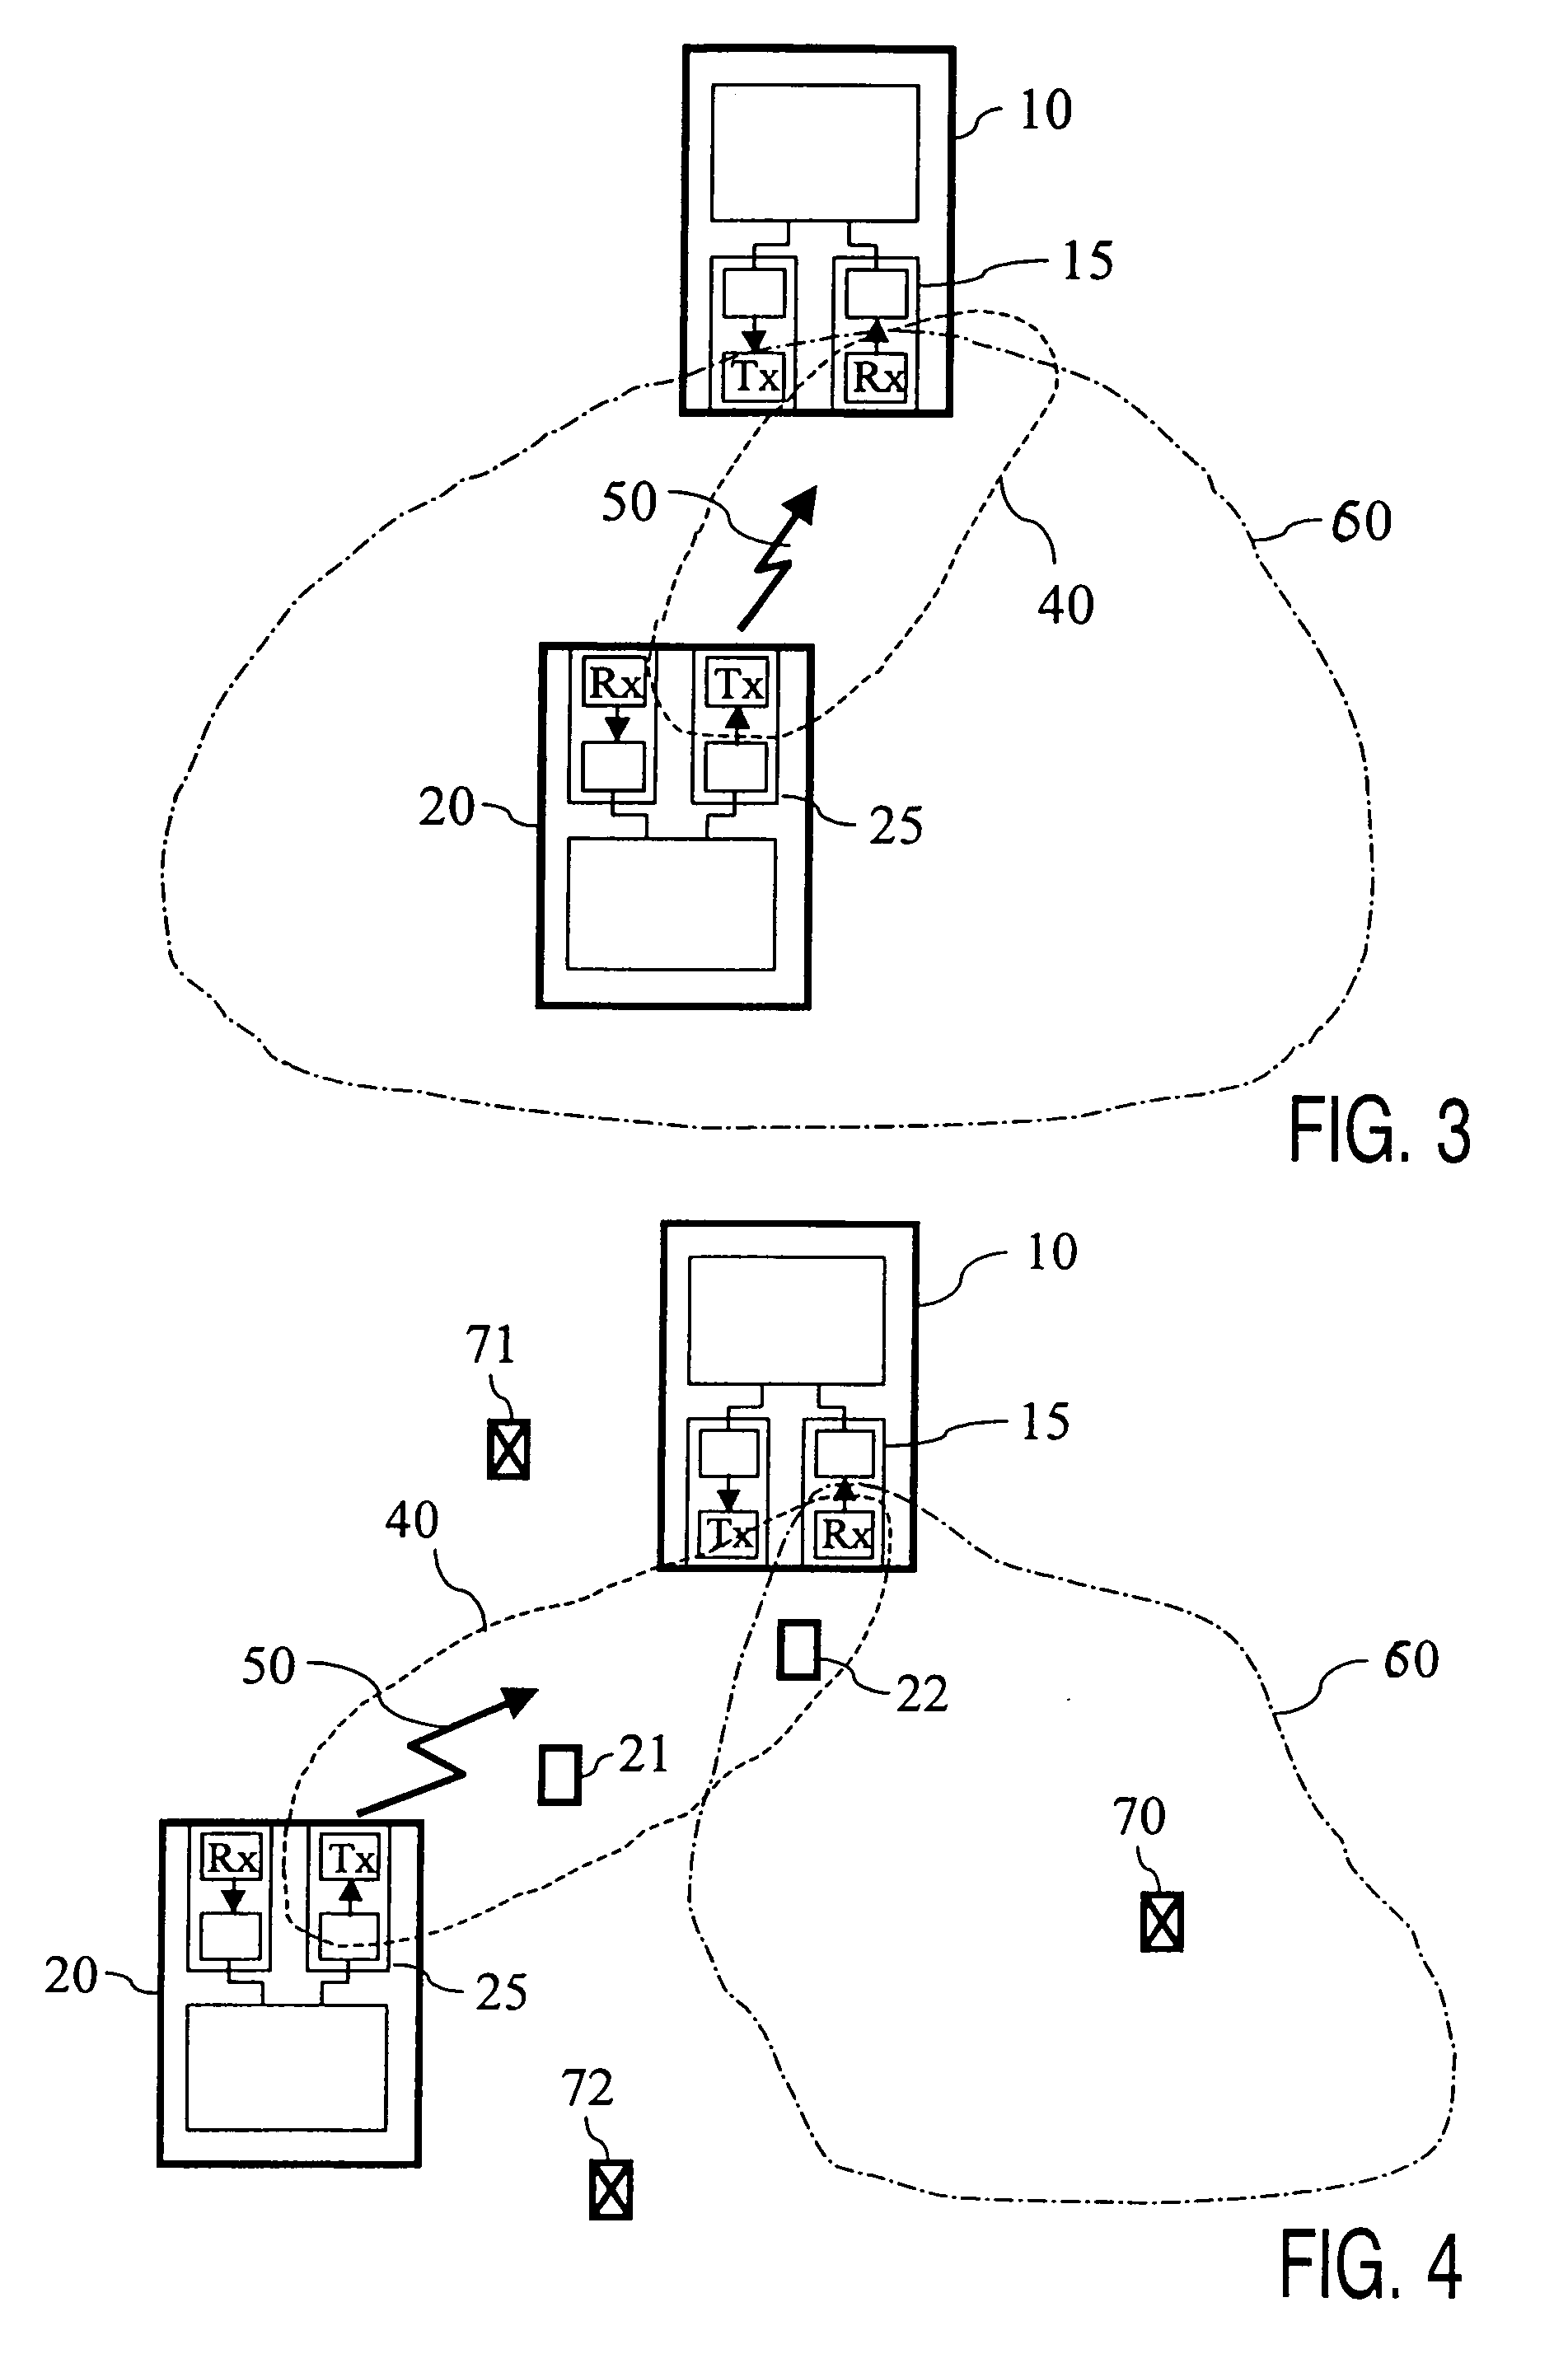 Wireless communication system having a guest transmitter and a host receiver